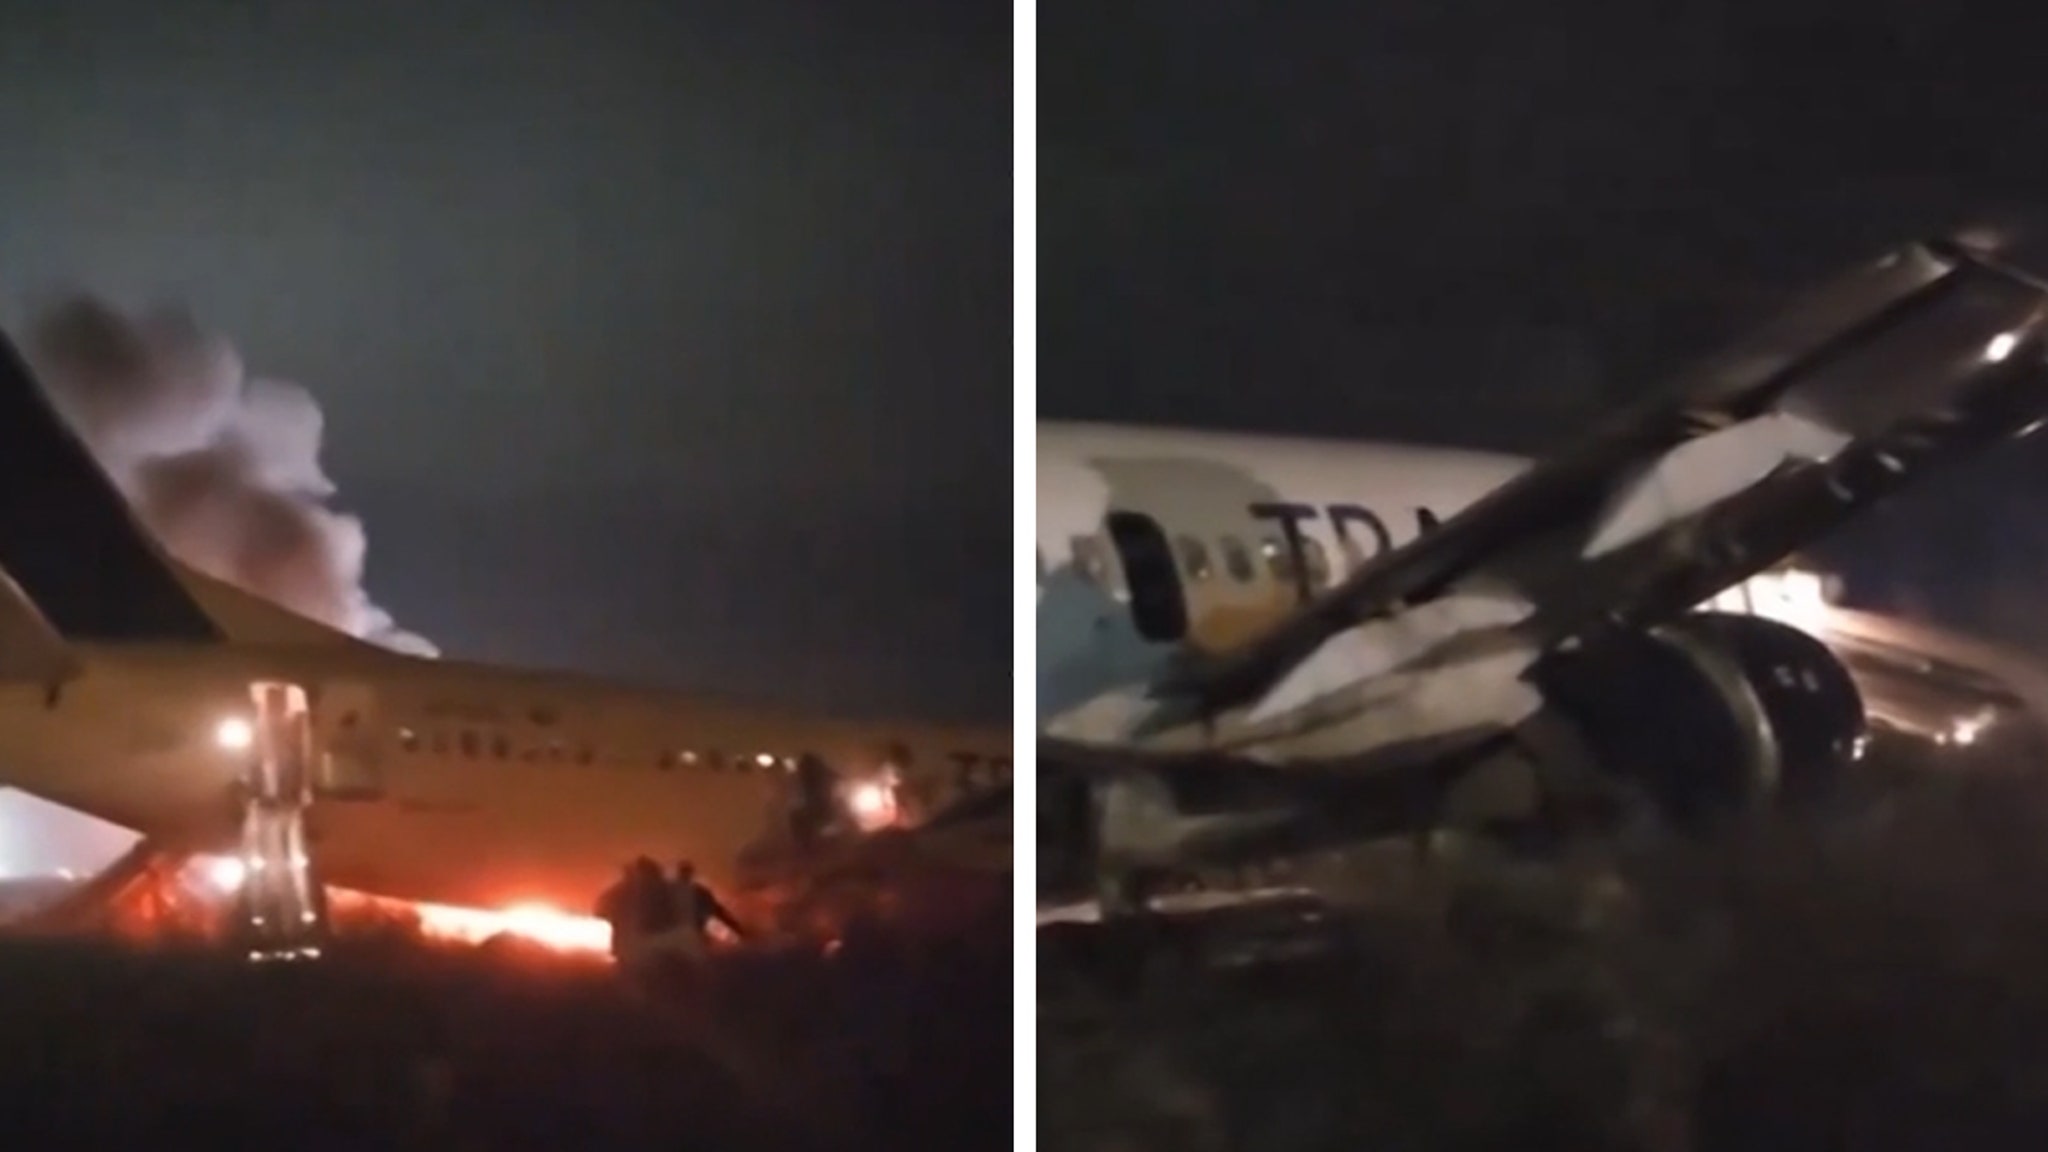 Boeing 737 Plane Catches on Fire in Senegal After Failed Takeoff Attempt